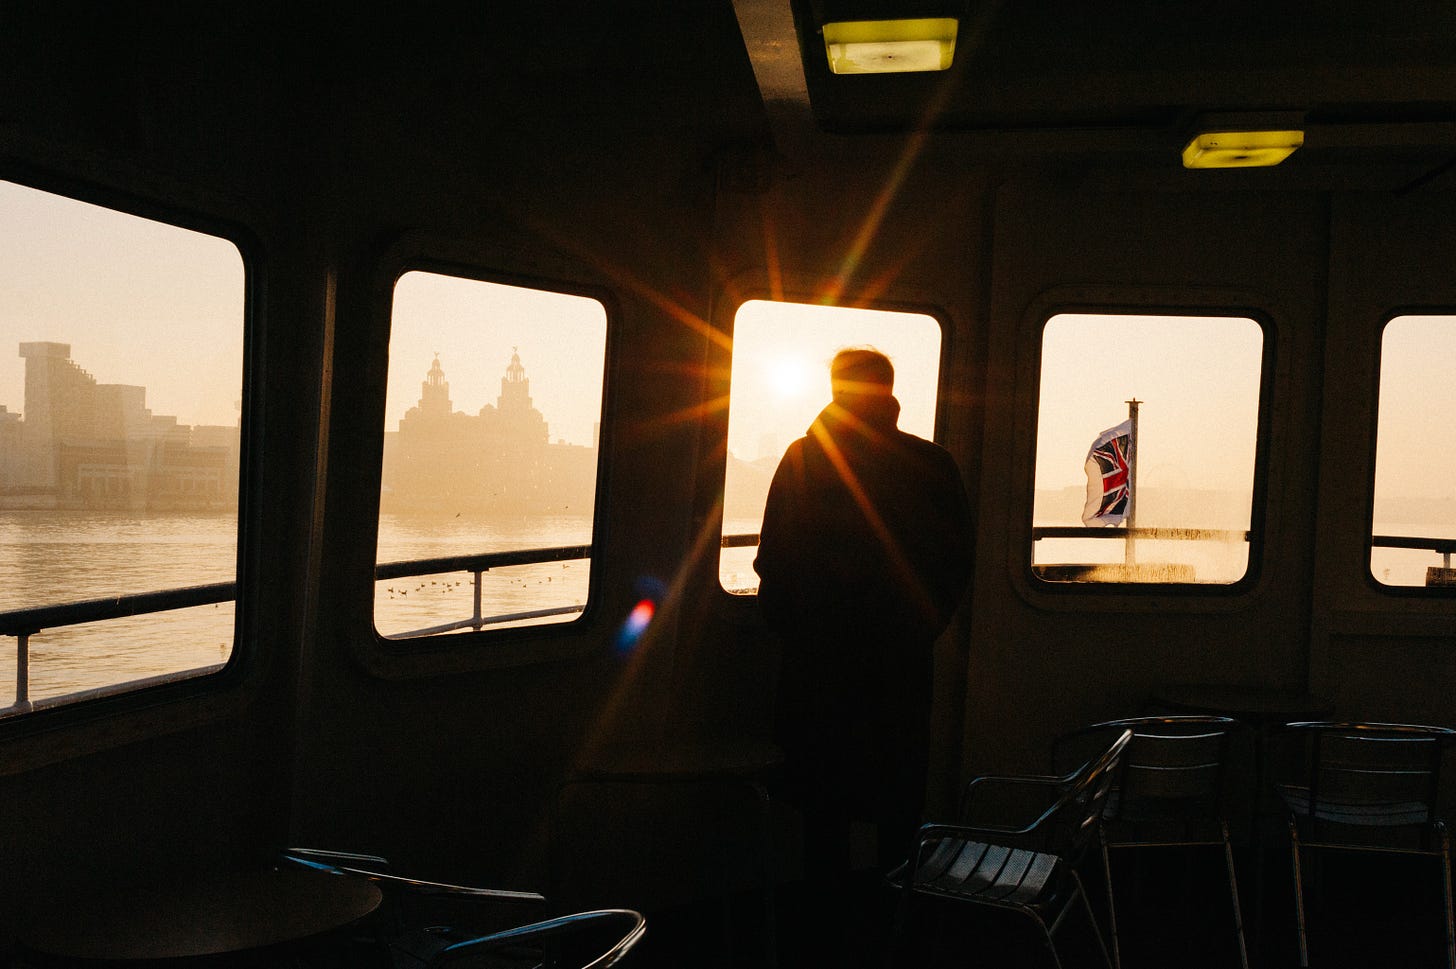 The Mersey Ferry crosses the river at sunrise. The sun is a giant star shining through the window of the ferry. A man looks out the window towards the waterfront.